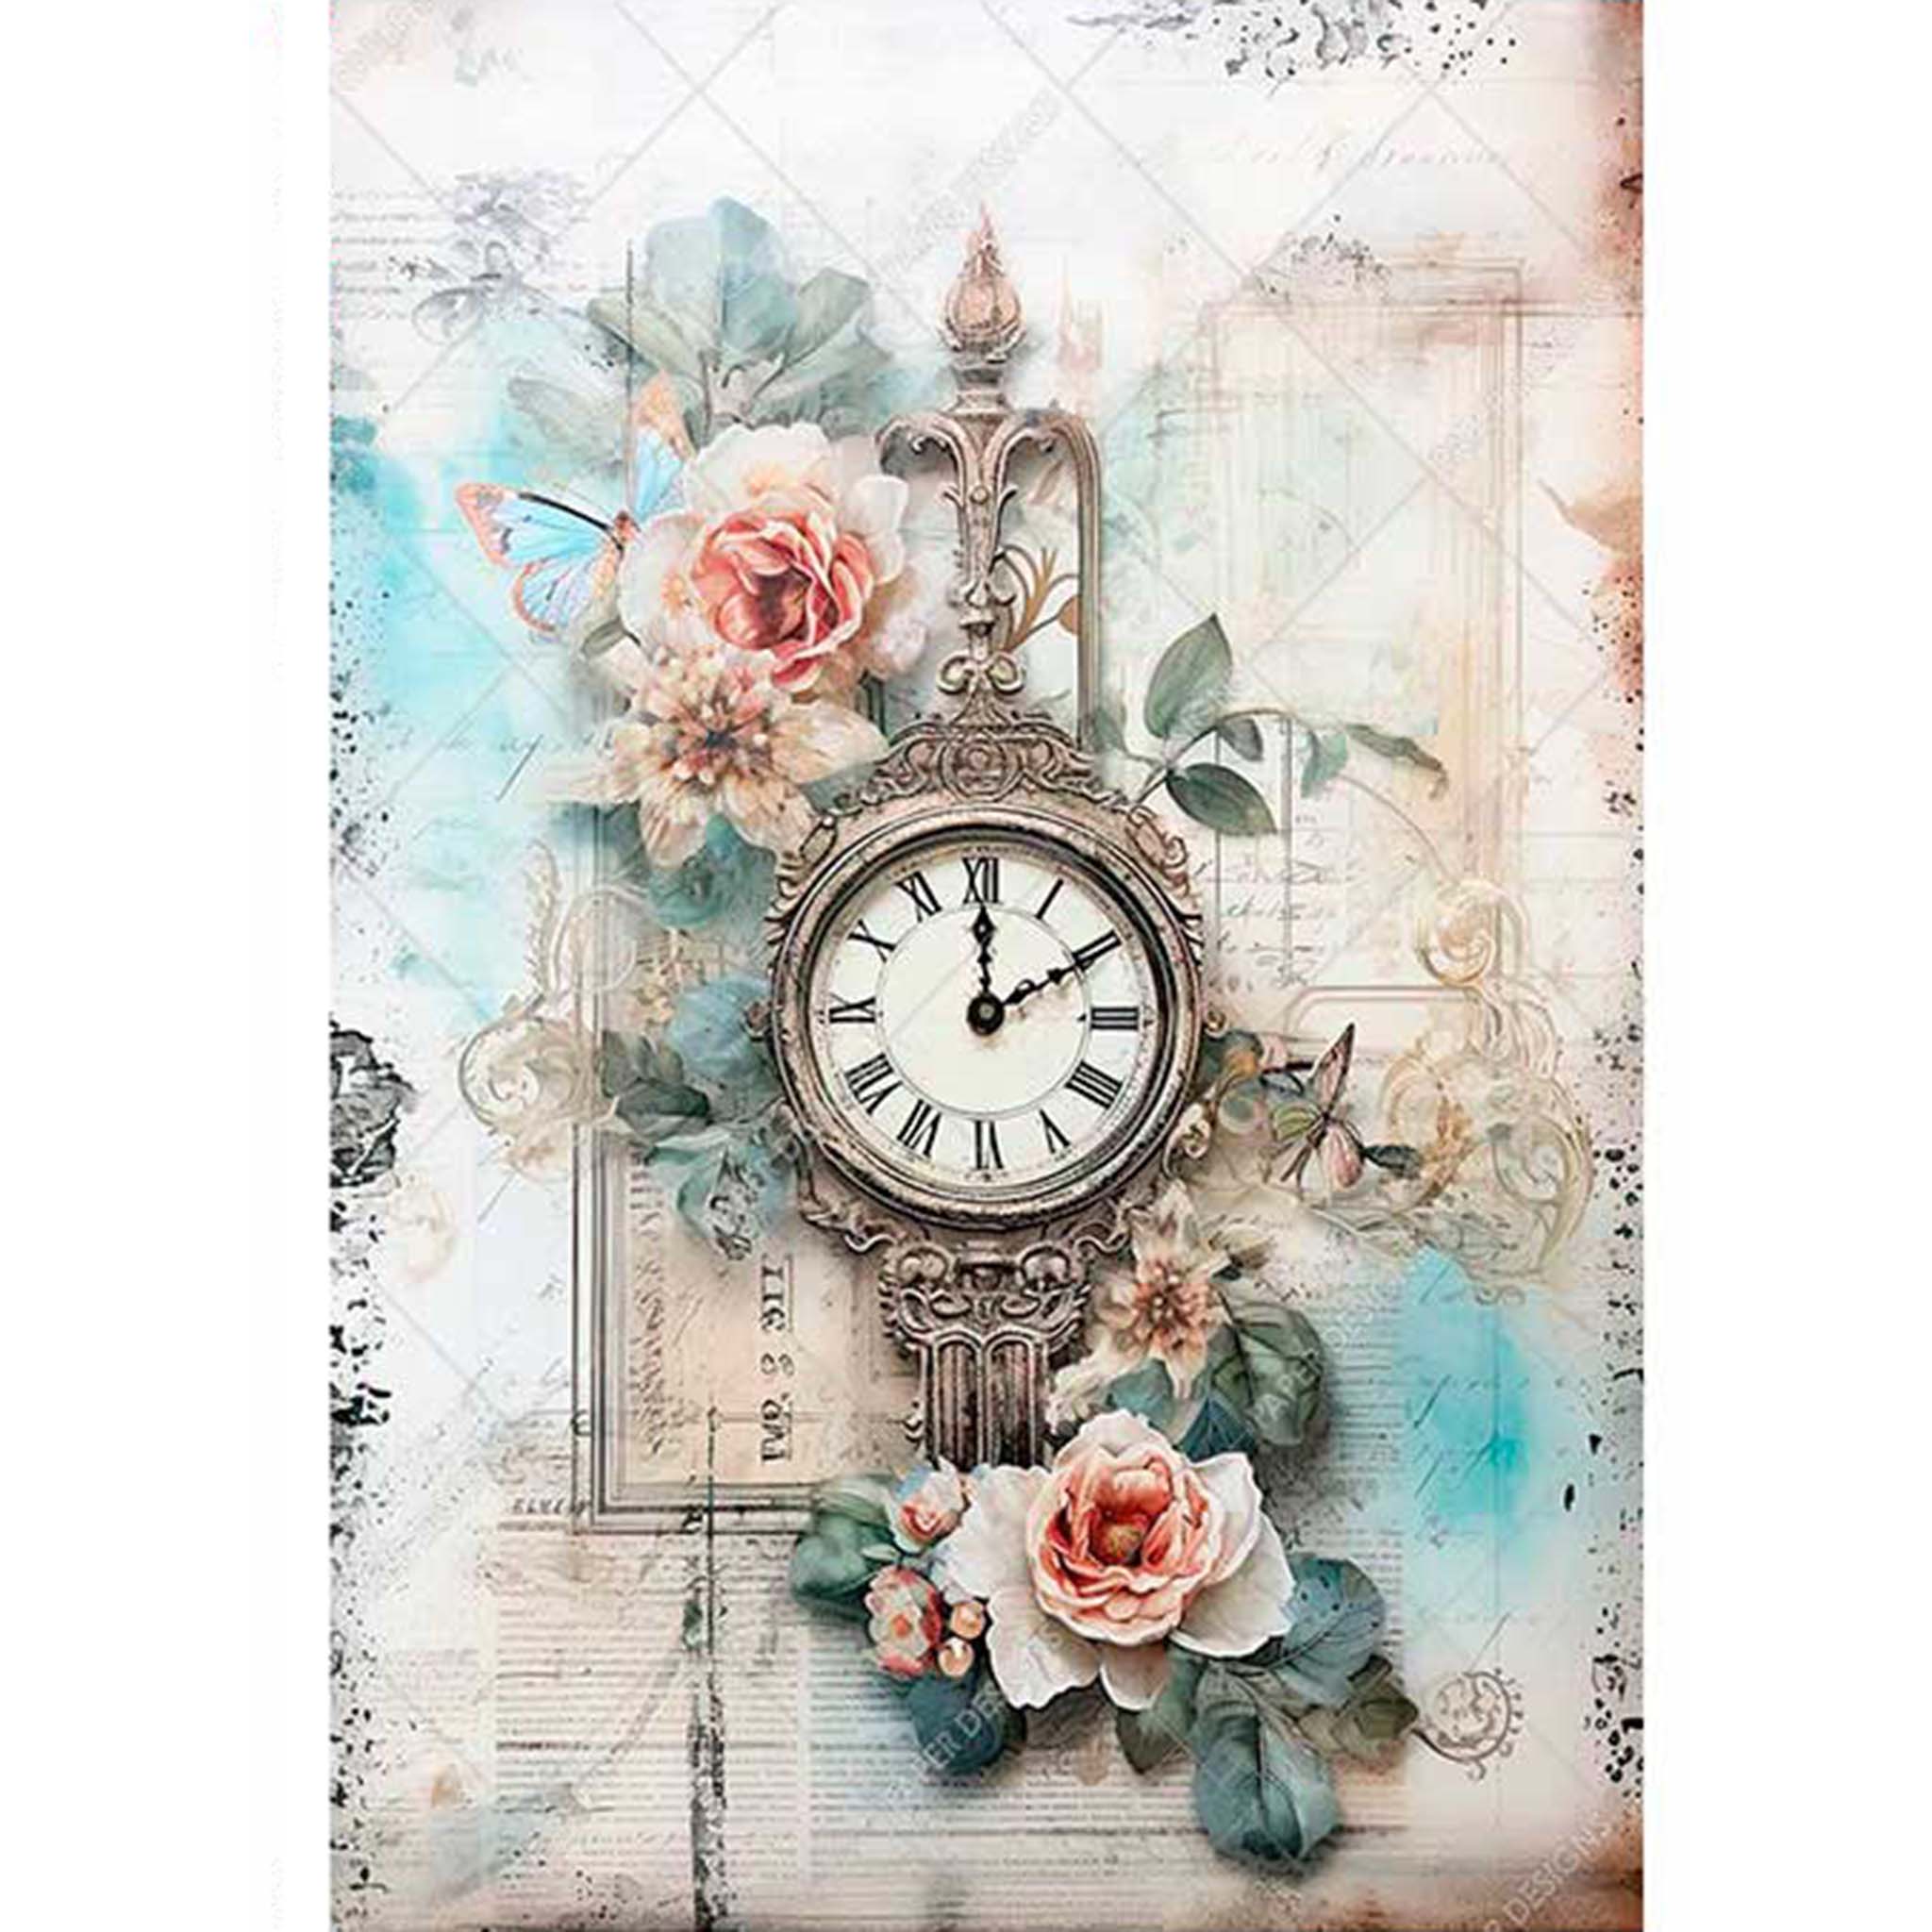 A4 rice paper design featuring an ornate clock surrounded by exquisite flowers. White borders are on the sides.